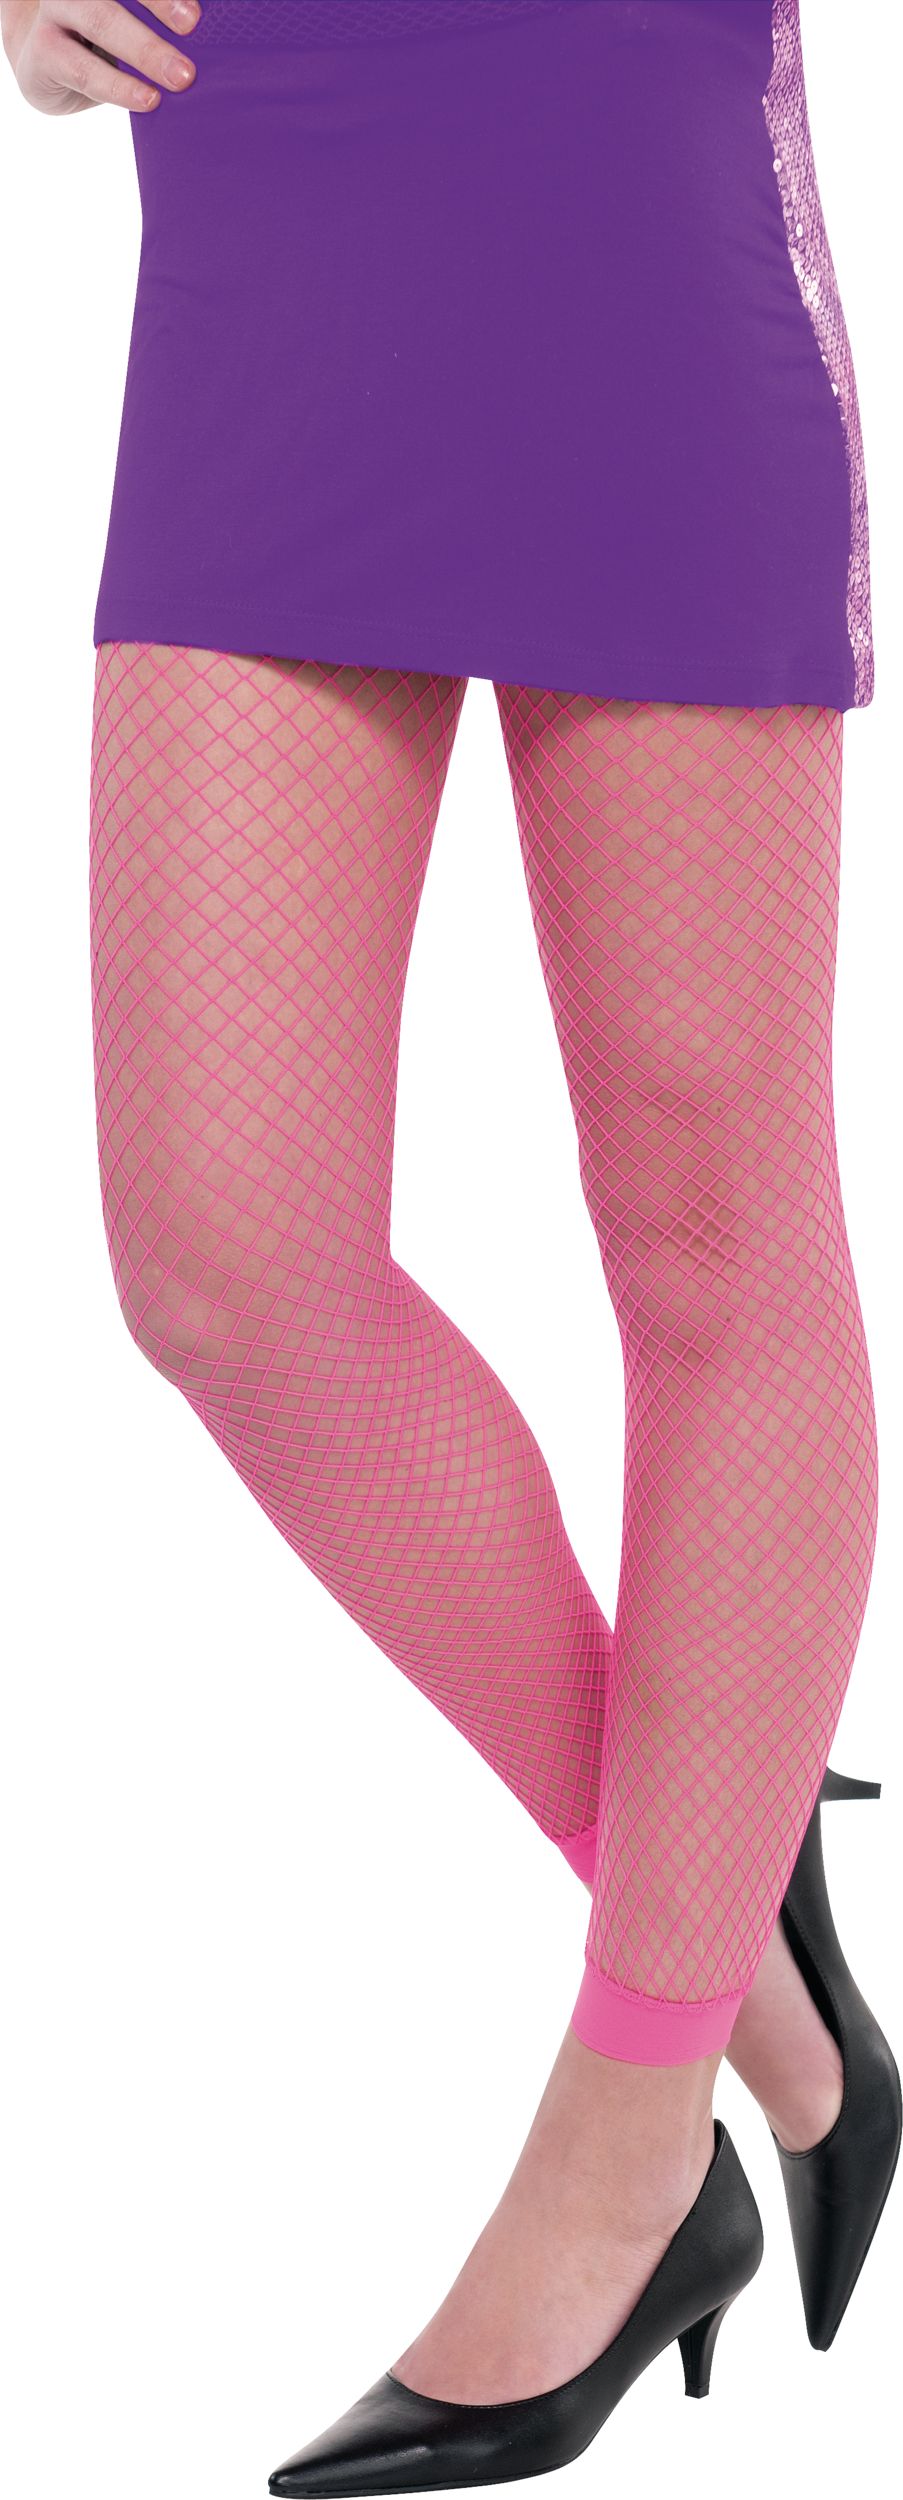 Barbie Doll Clothes Shimmery Pink Footless Leggings Stockings